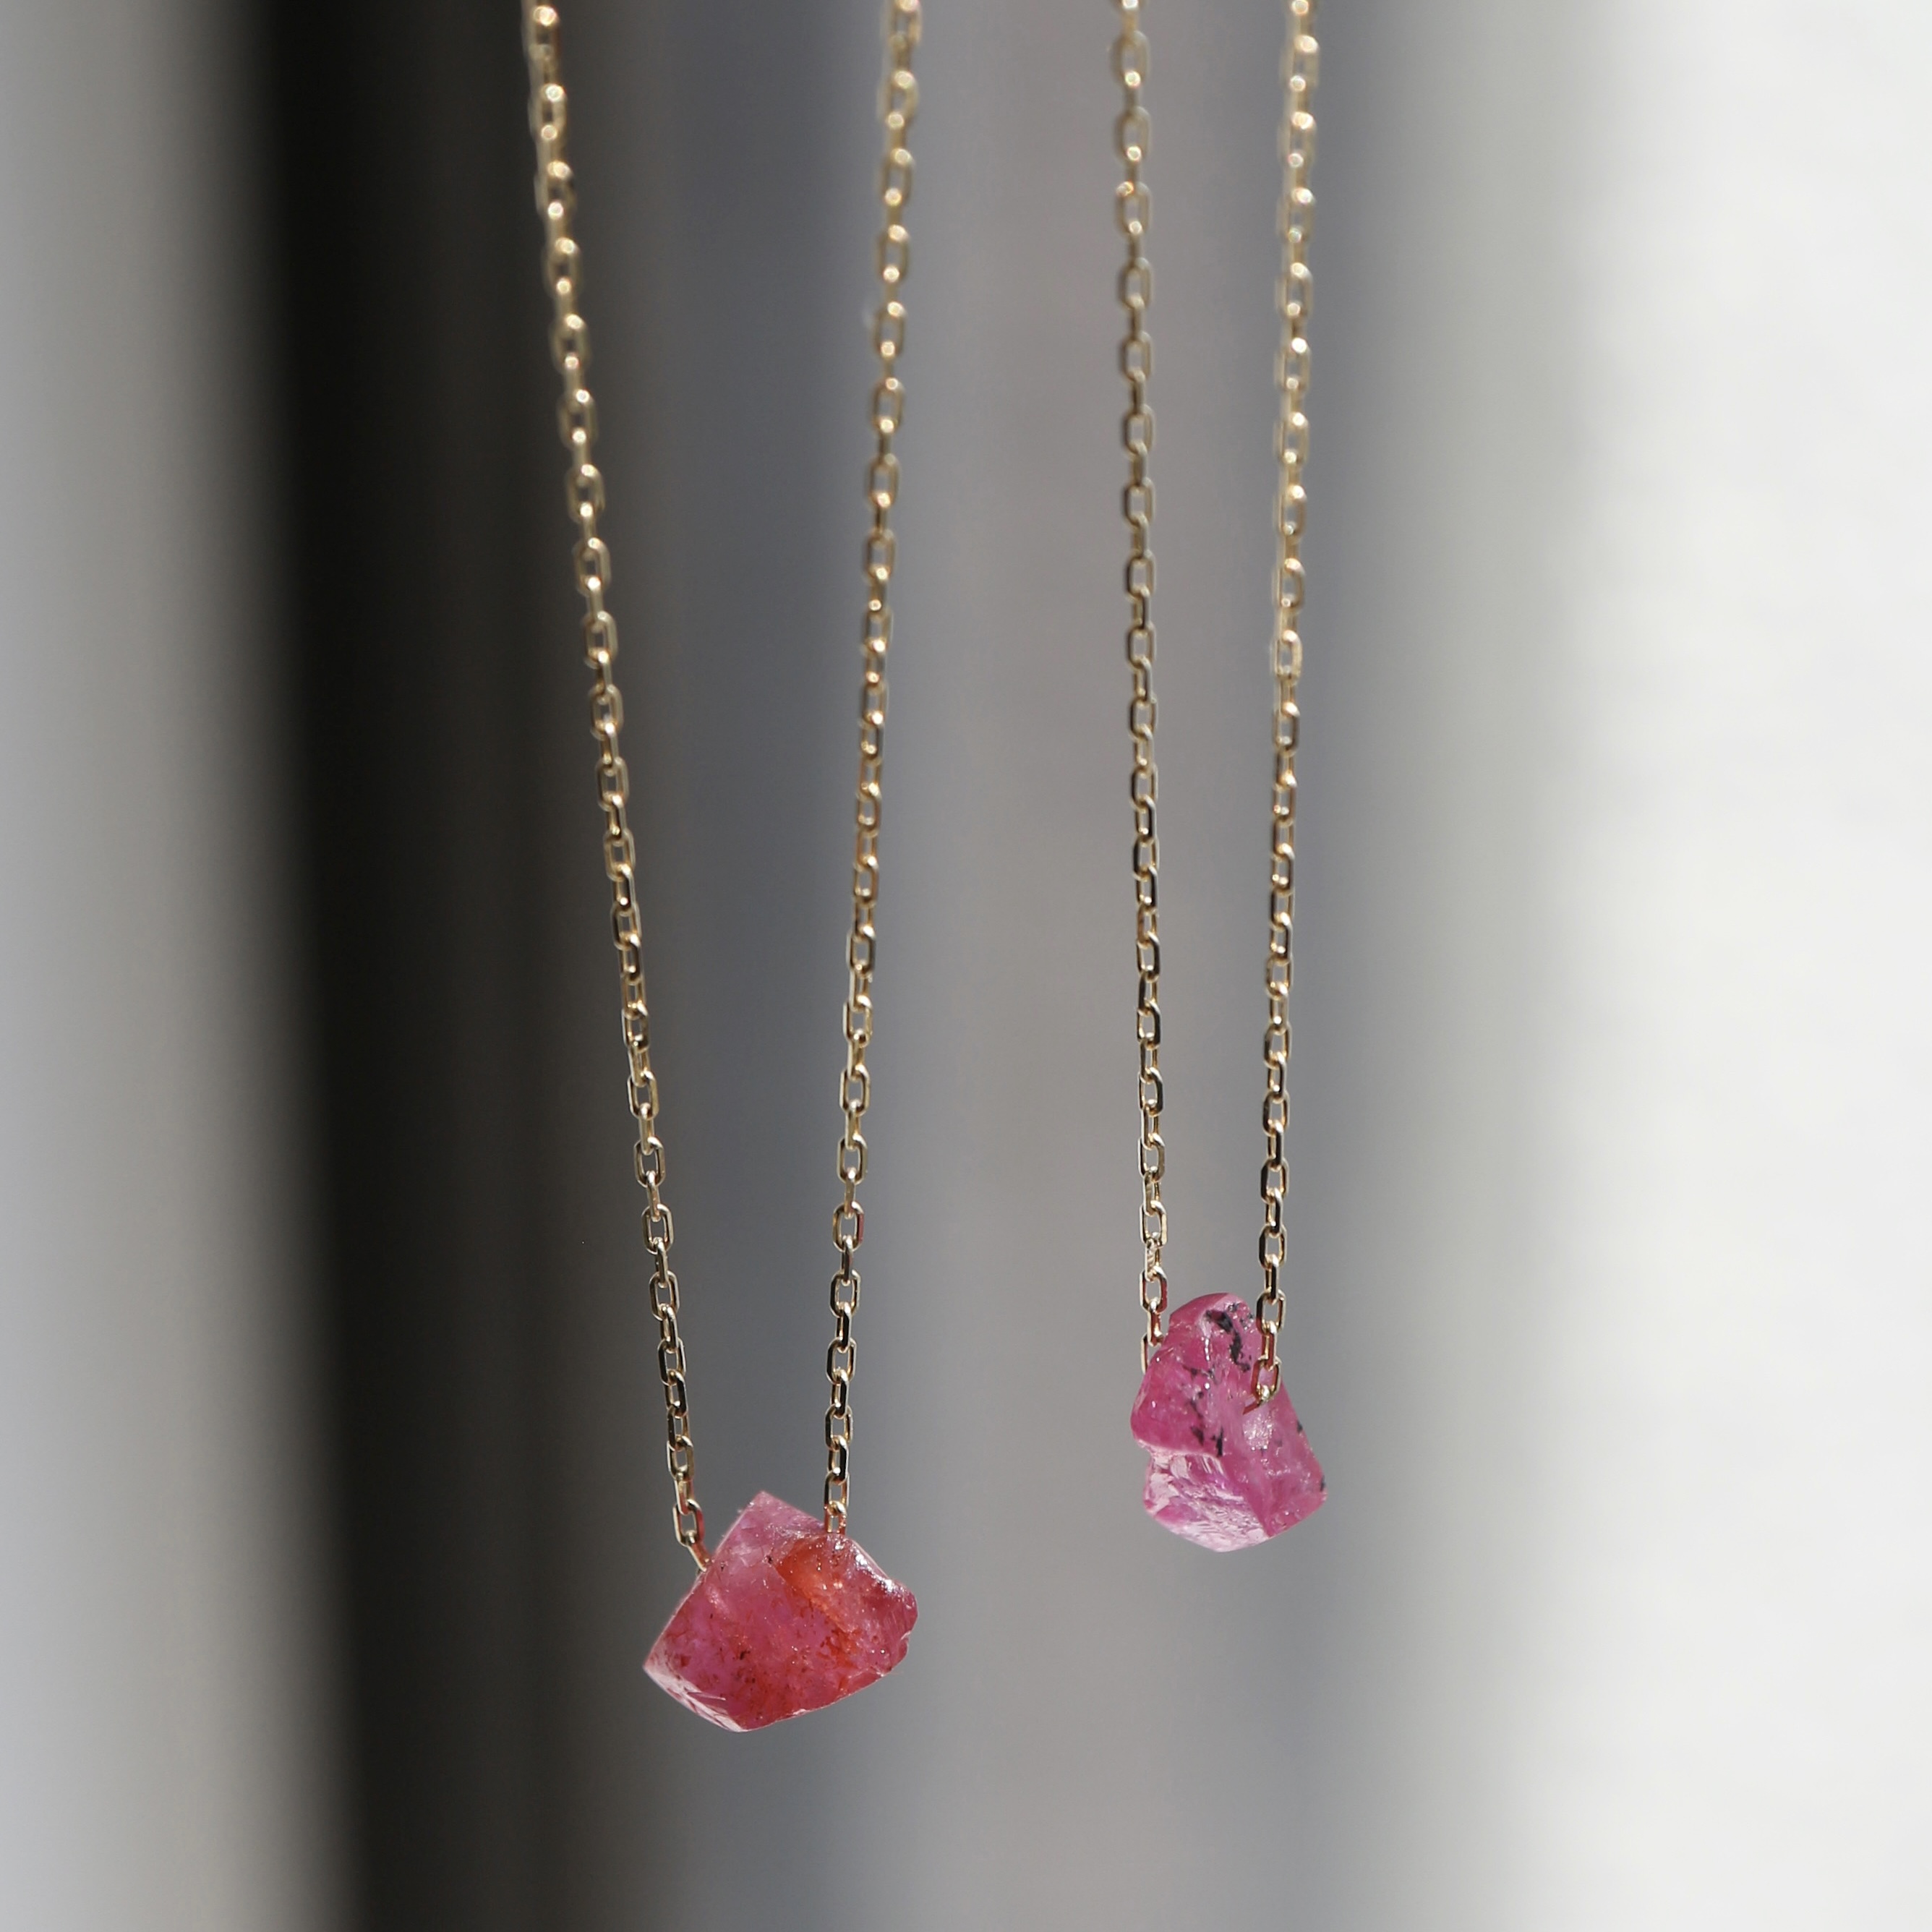 bororo（ボロロ）Ruby Top Necklace | ルビー ネックレス - CULET 公式 